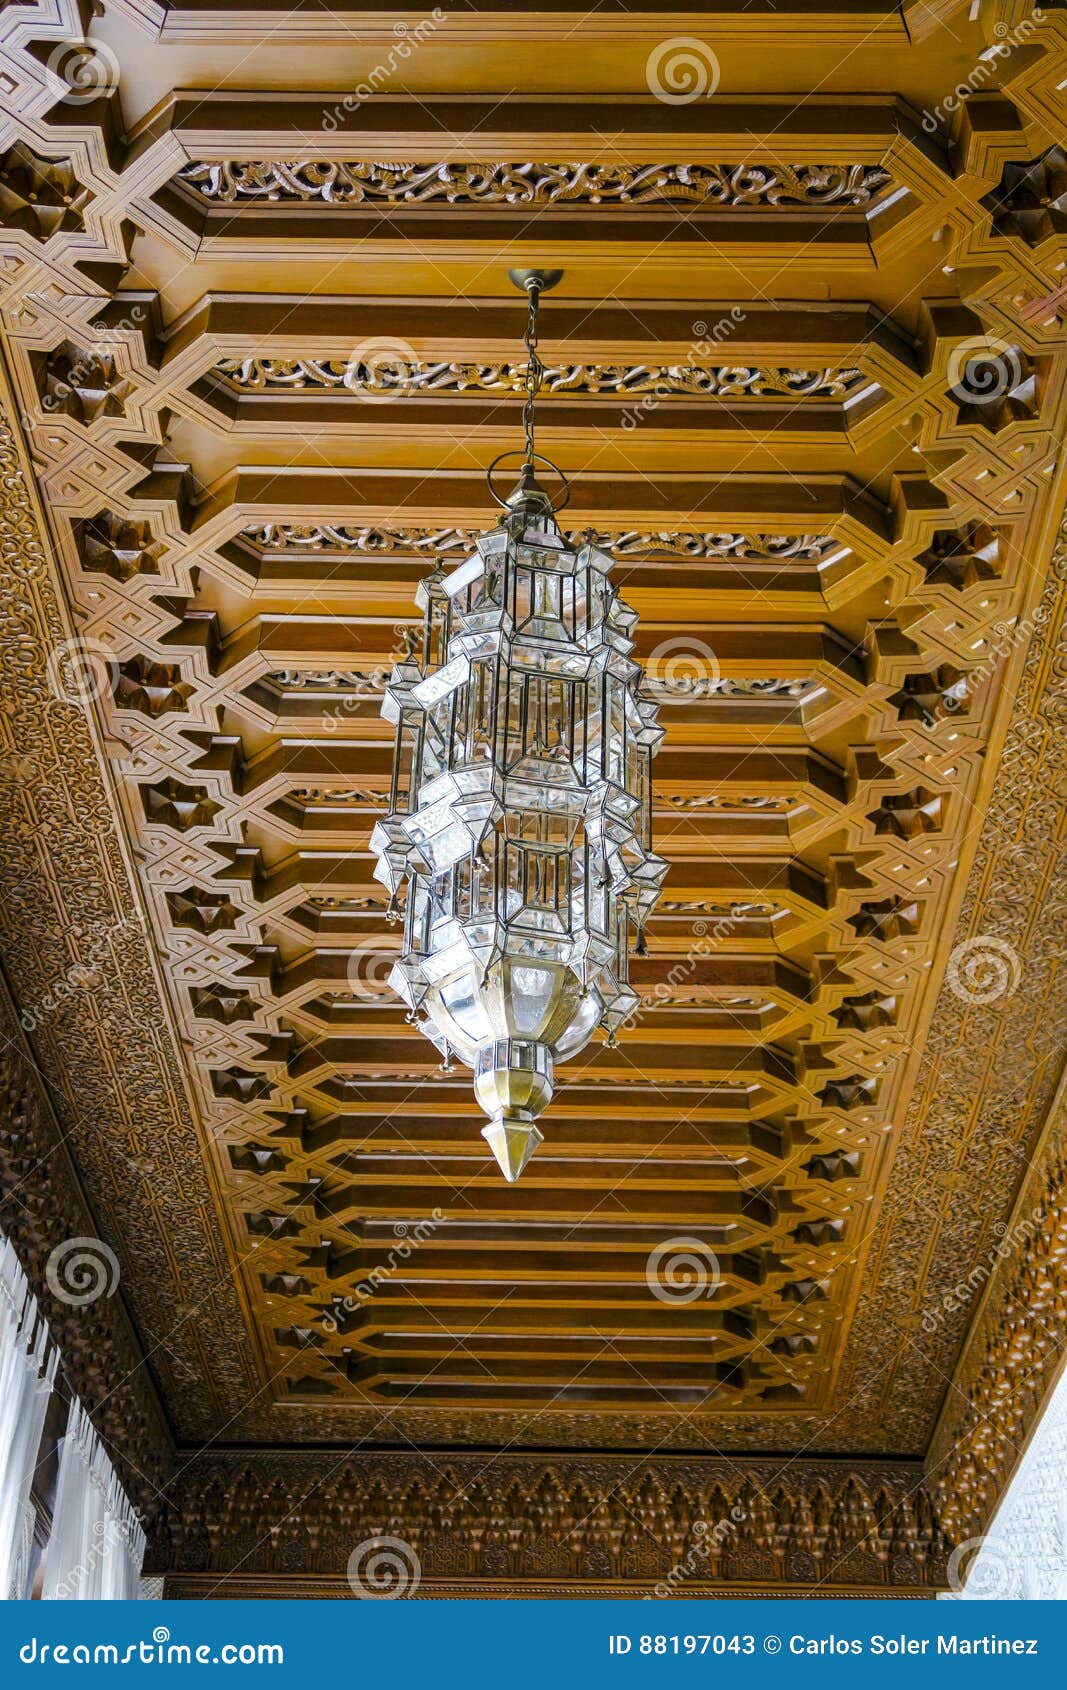 Wooden Ceilings And Arabic Lamp Typical Of Marrakesh Morocco